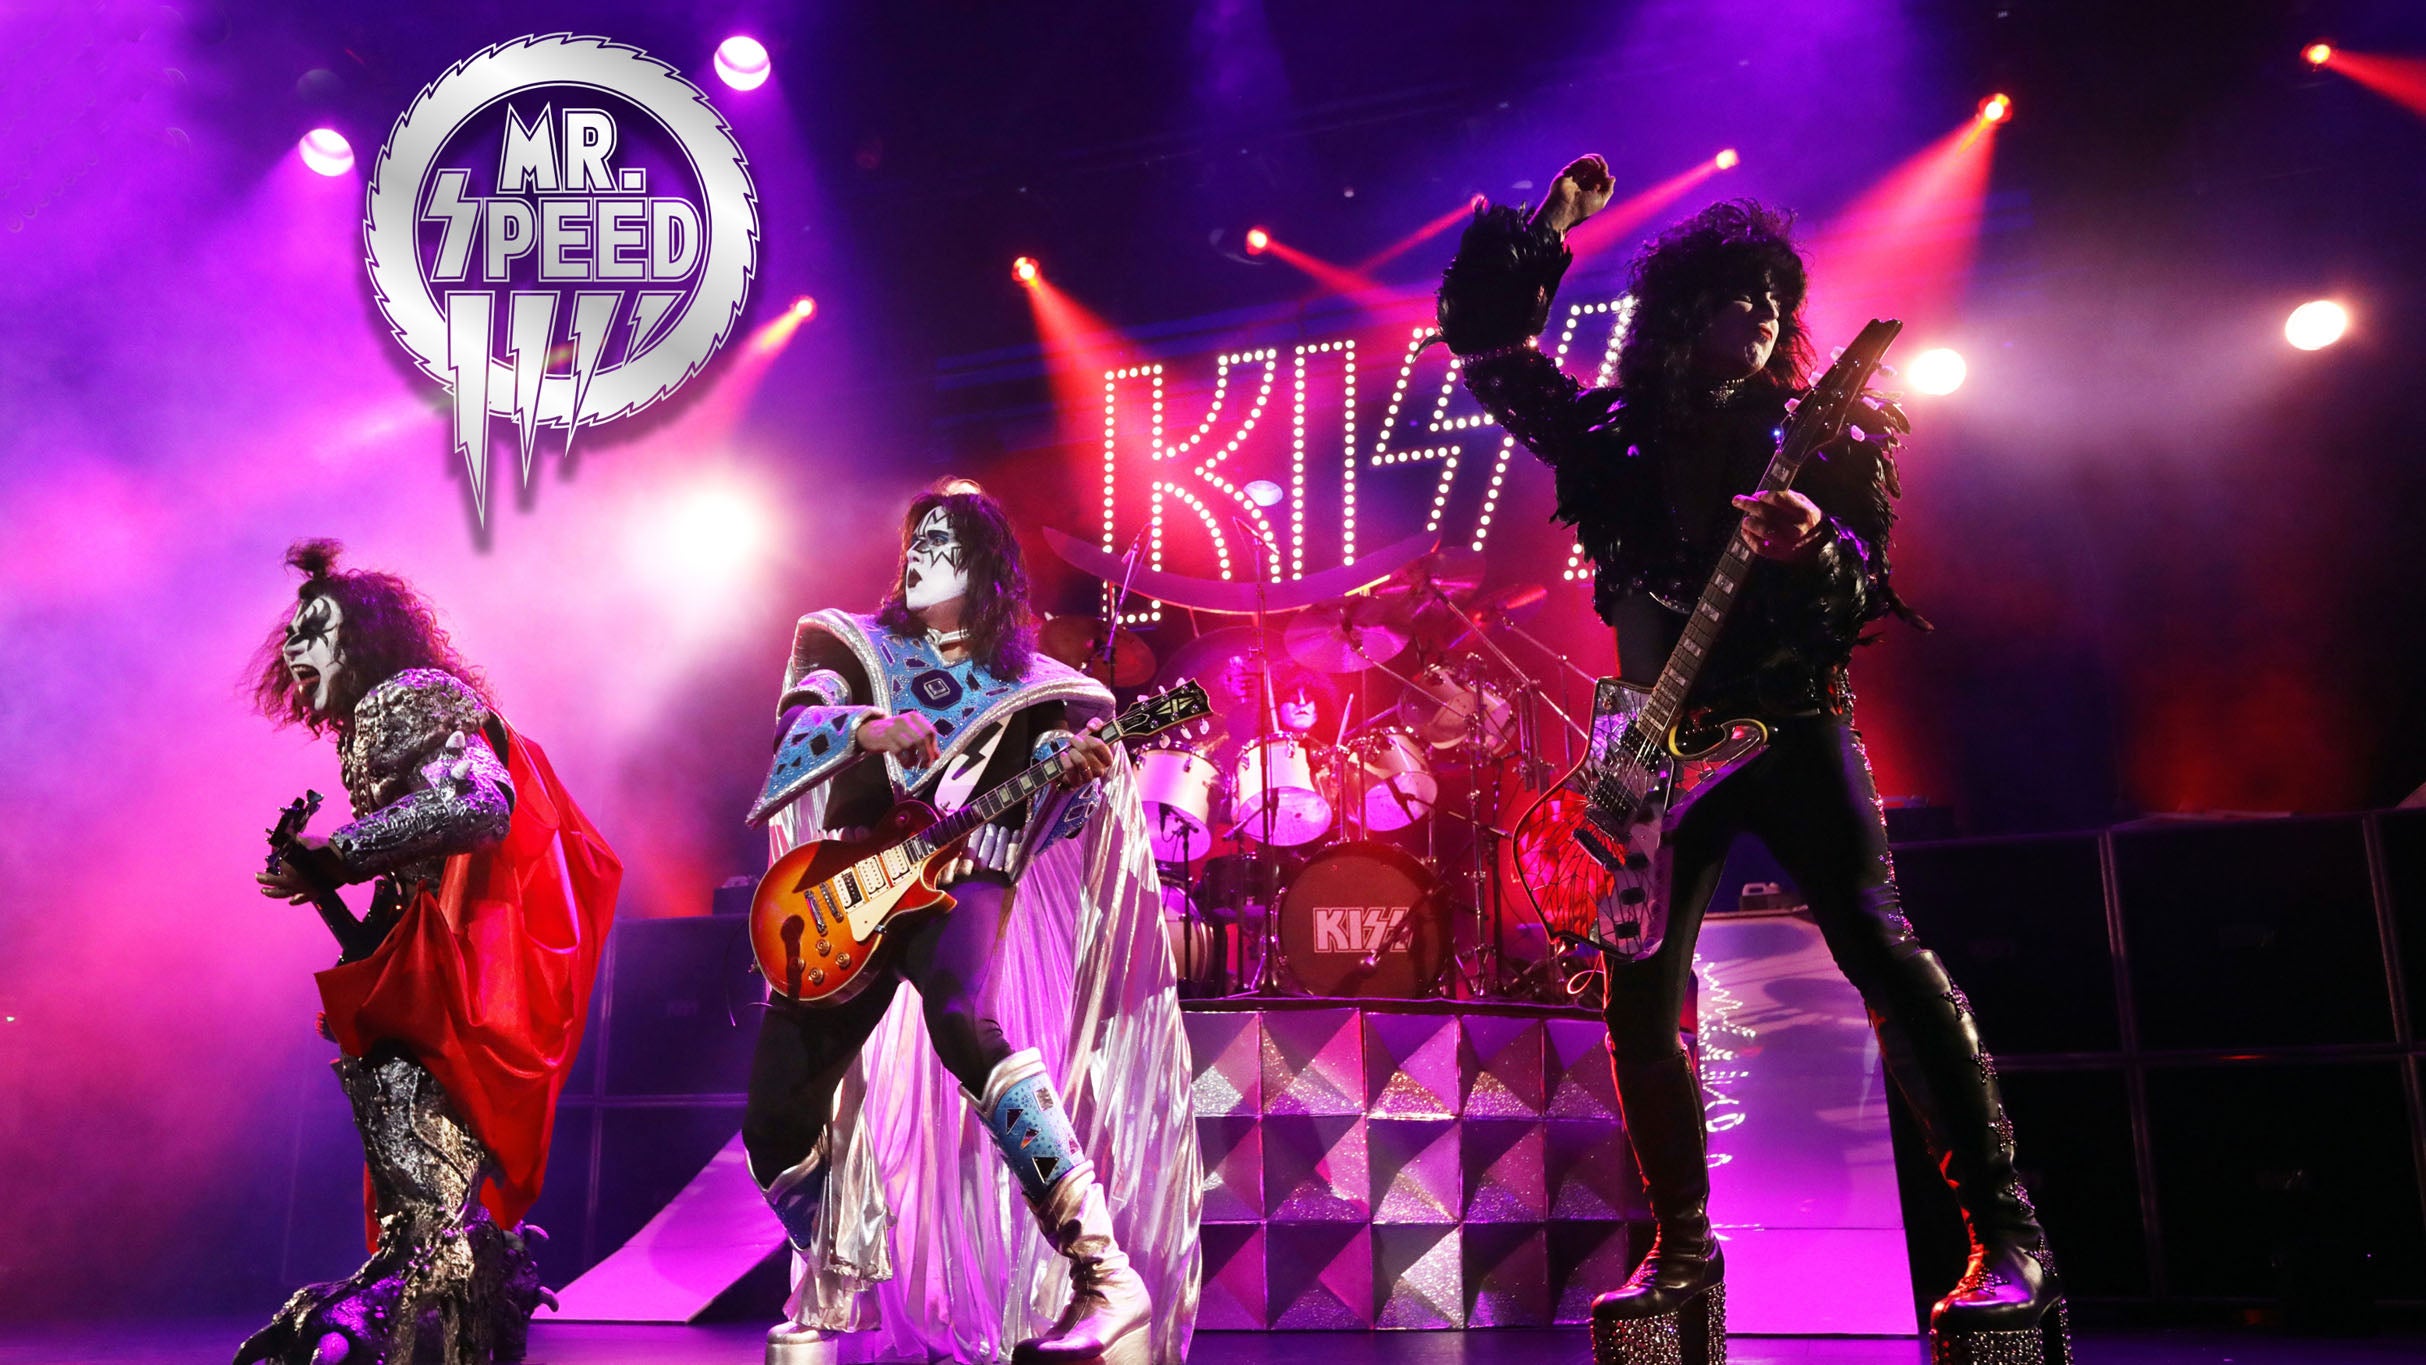 Mr. Speed - A Tribute to Kiss in Cleveland promo photo for Ticketmaster presale offer code